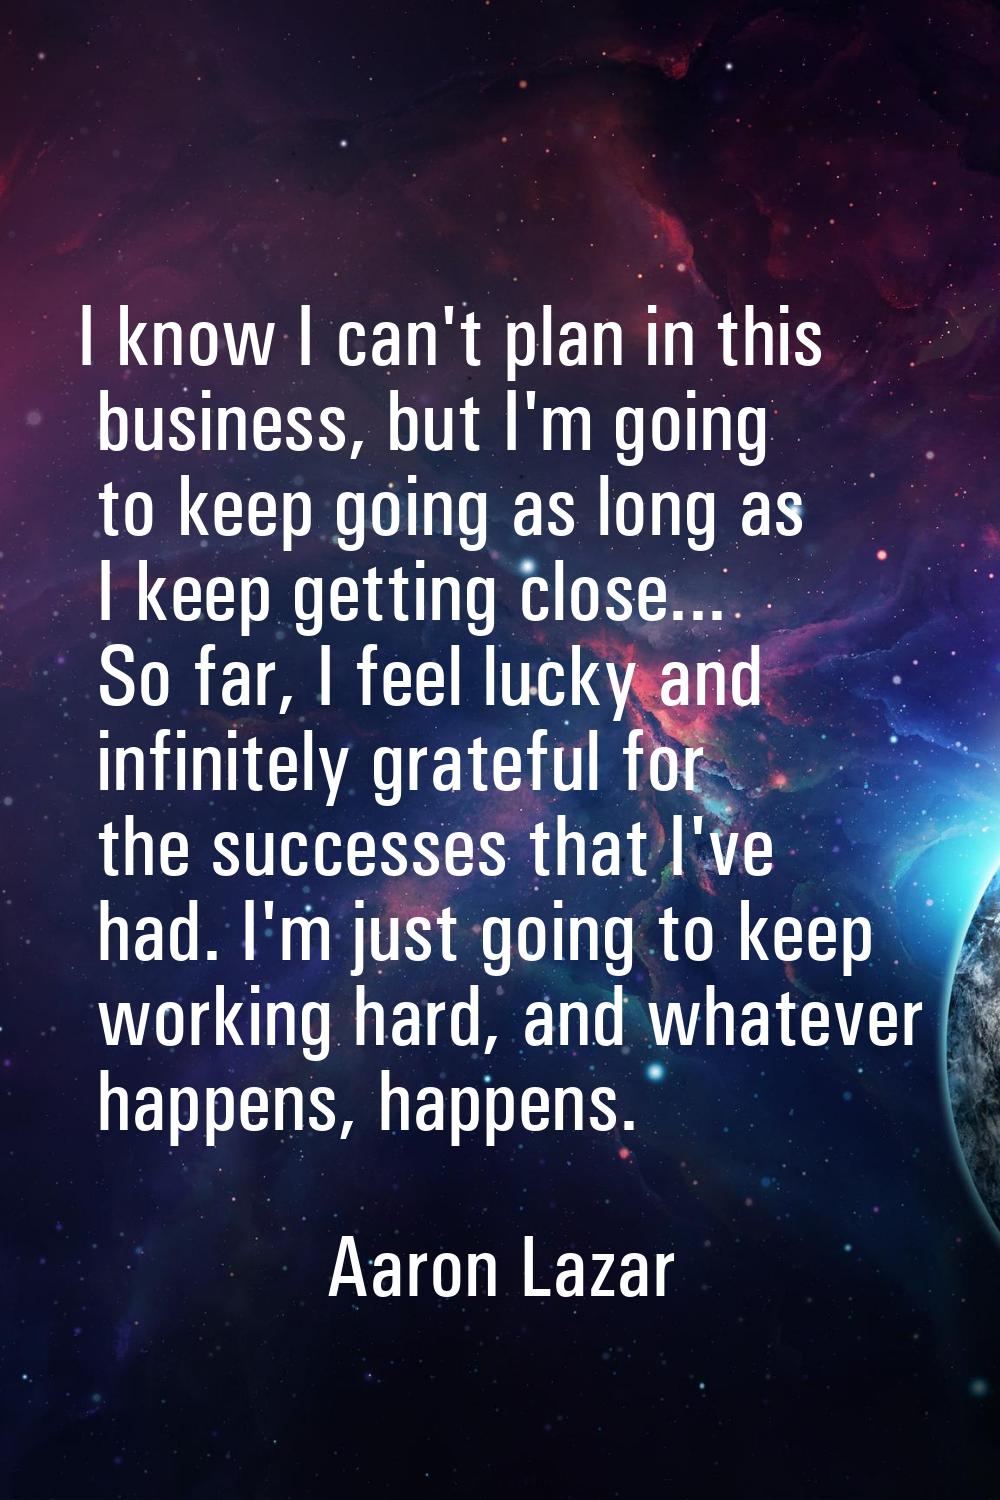 I know I can't plan in this business, but I'm going to keep going as long as I keep getting close..